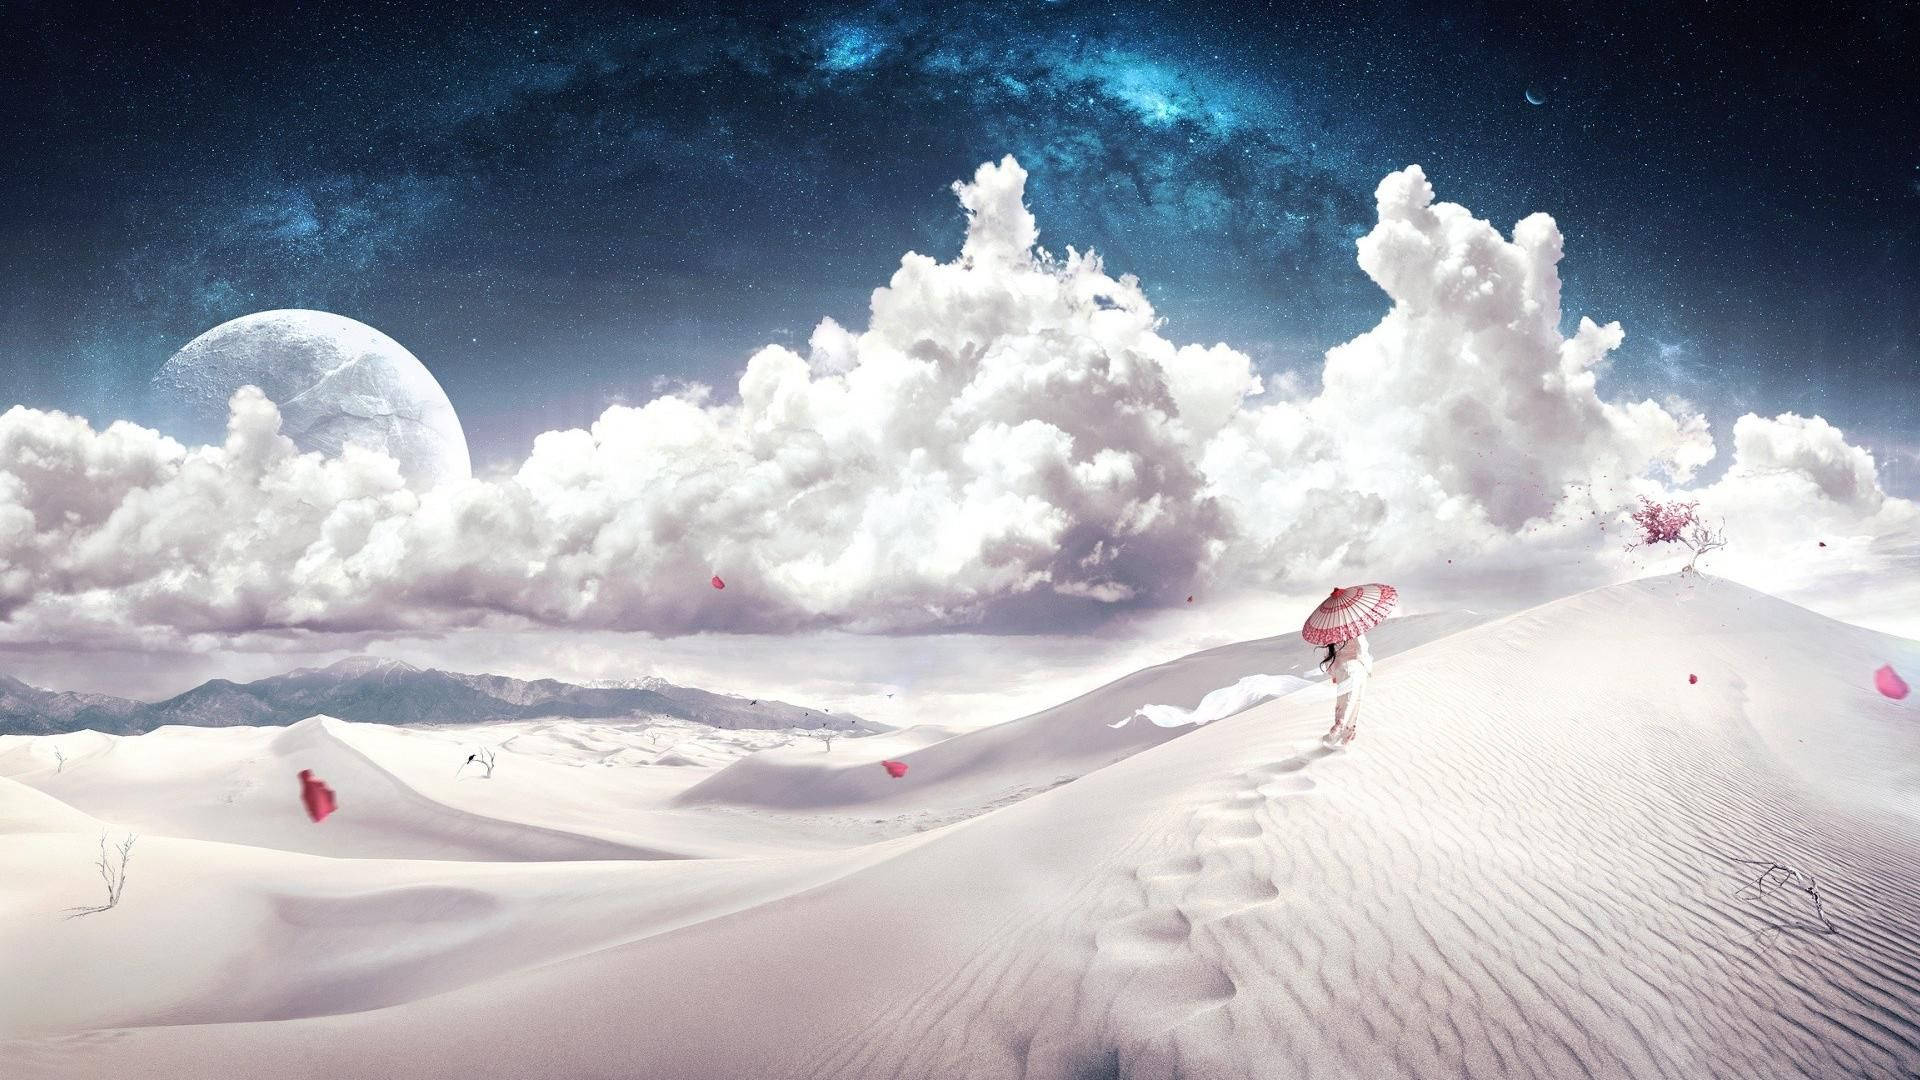 A Woman Is Walking Through A Desert With Clouds And A Moon Background